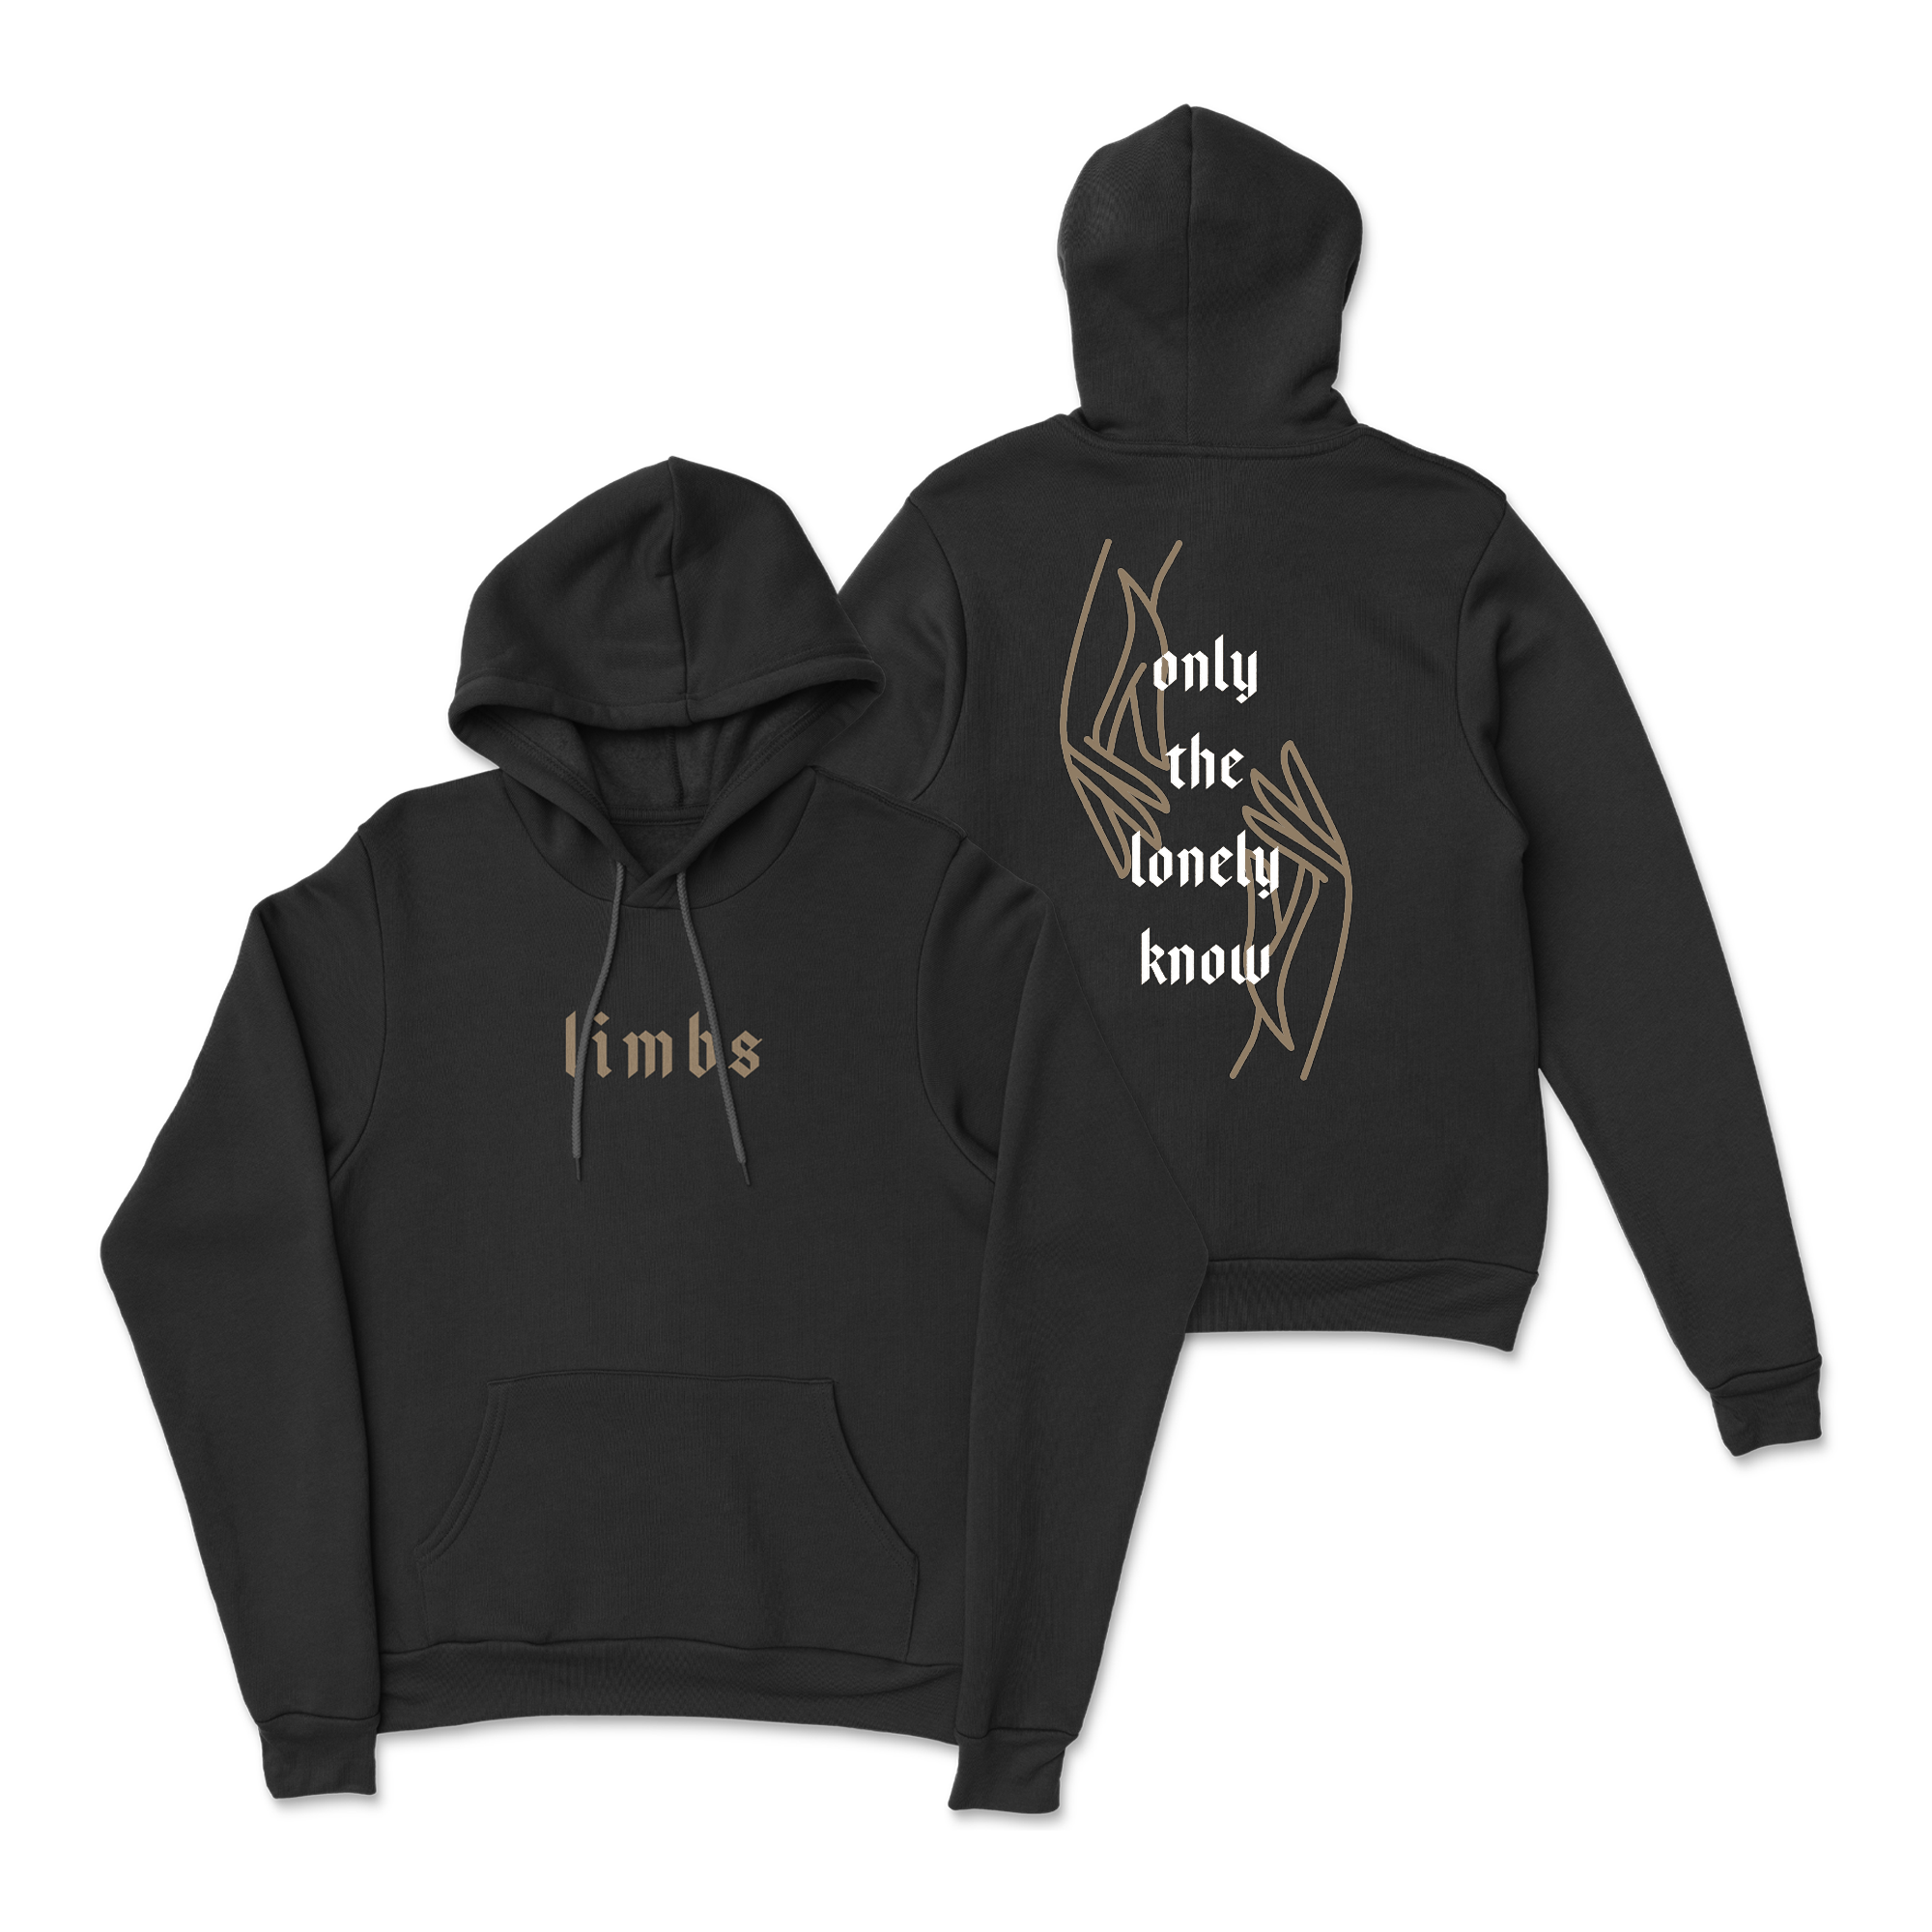 Limbs - Only the Lonely Know Hoodie